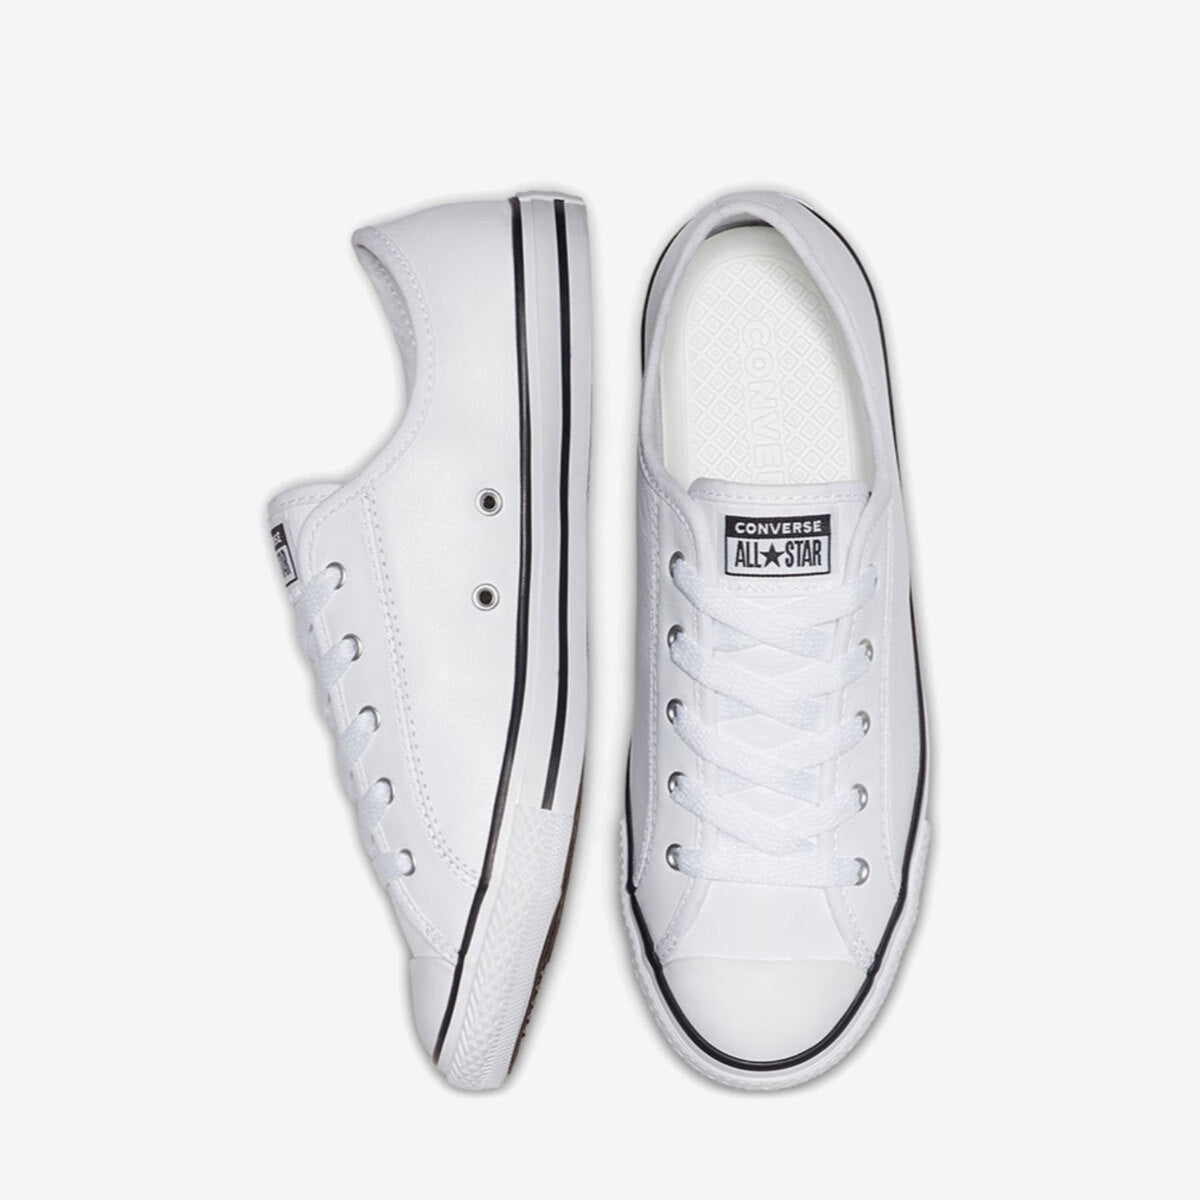 CONVERSE Dainty 2.0 Leather Low White - Image 7